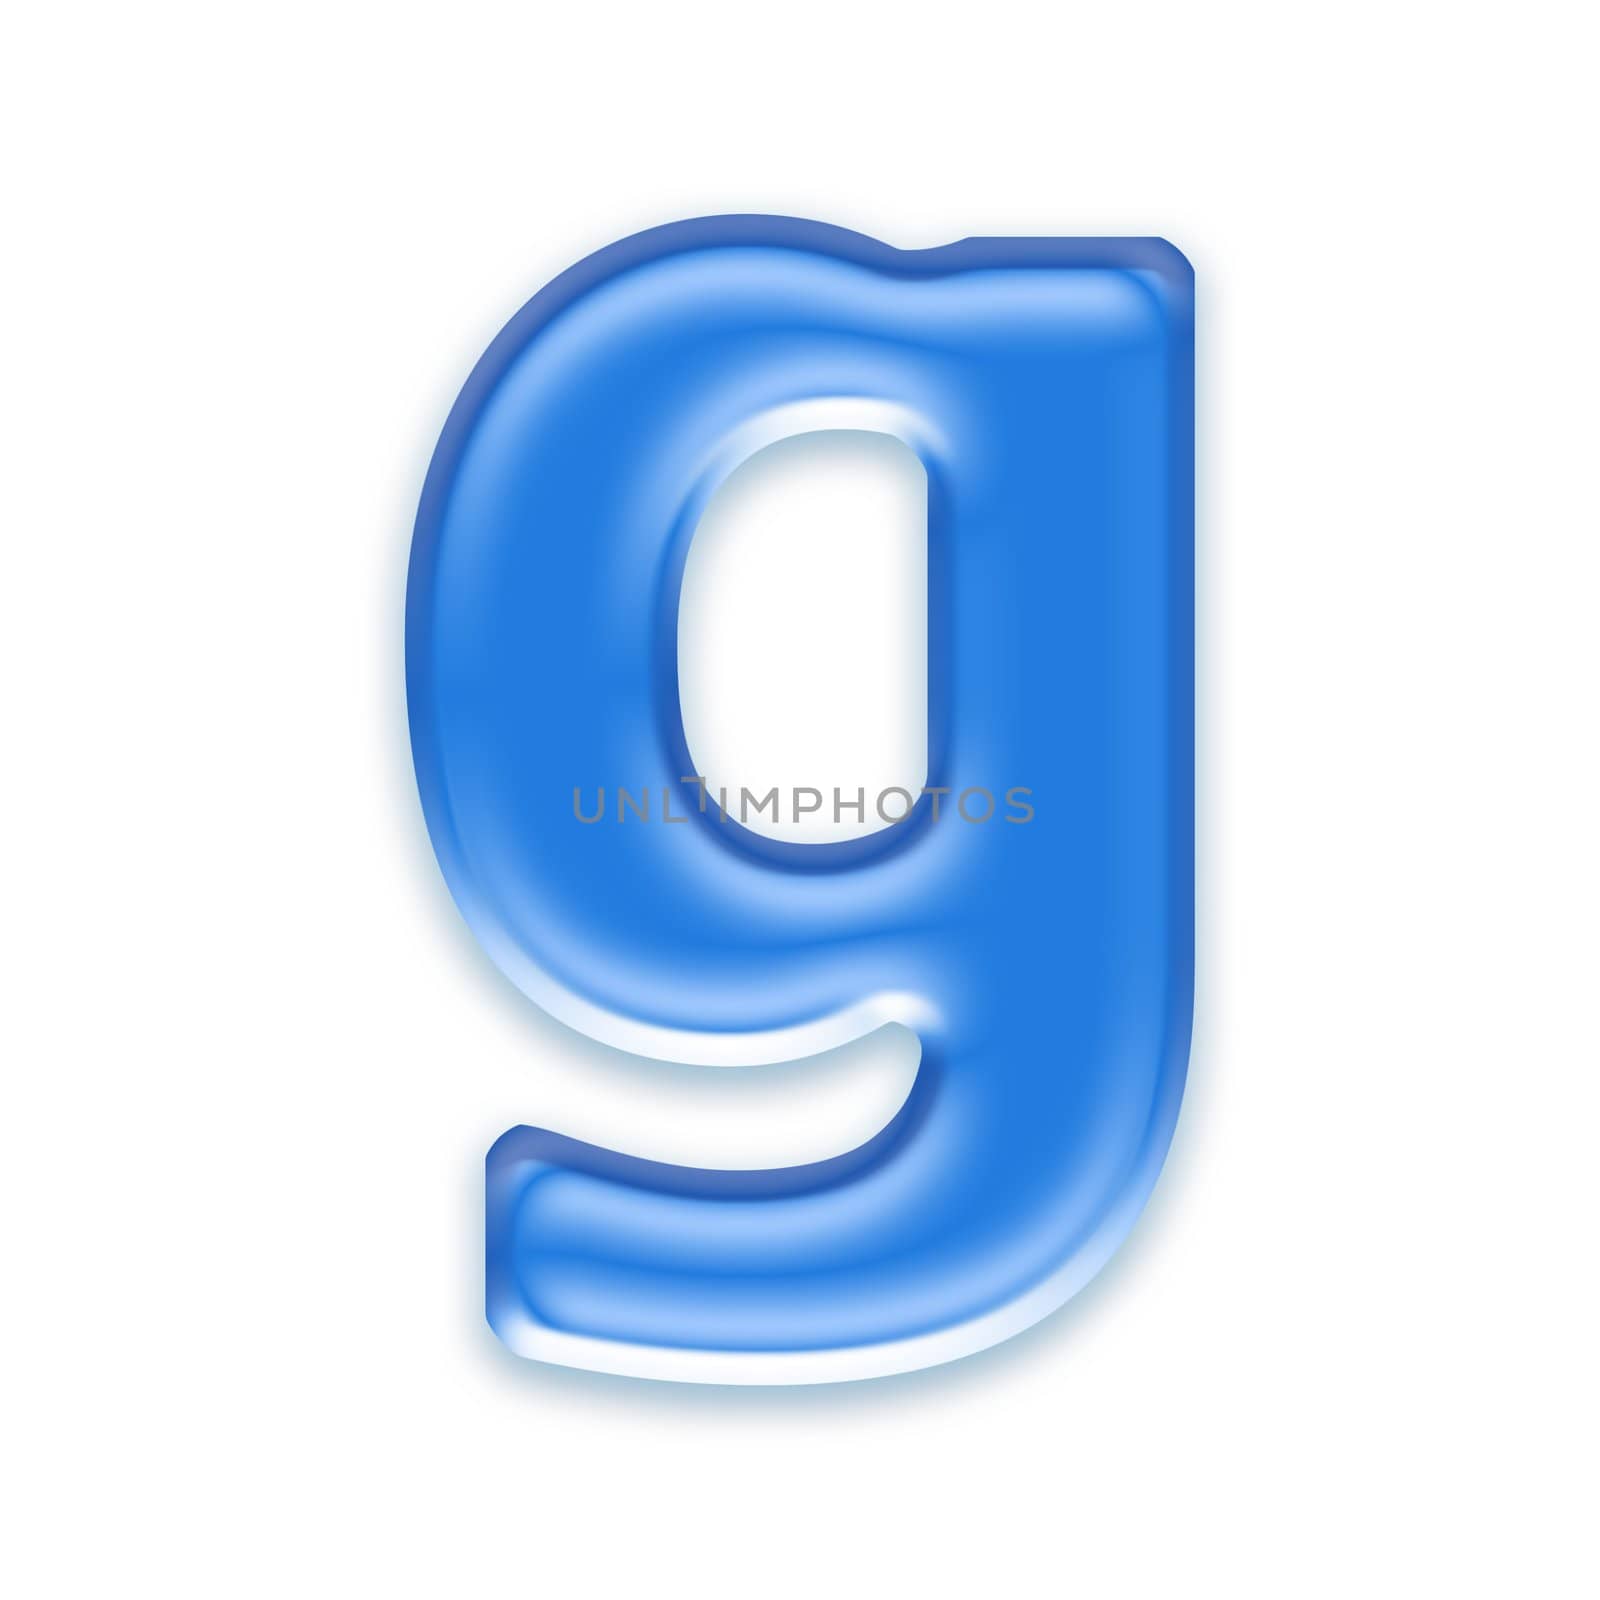 Aqua letter isolated on white background  - g by chrisroll